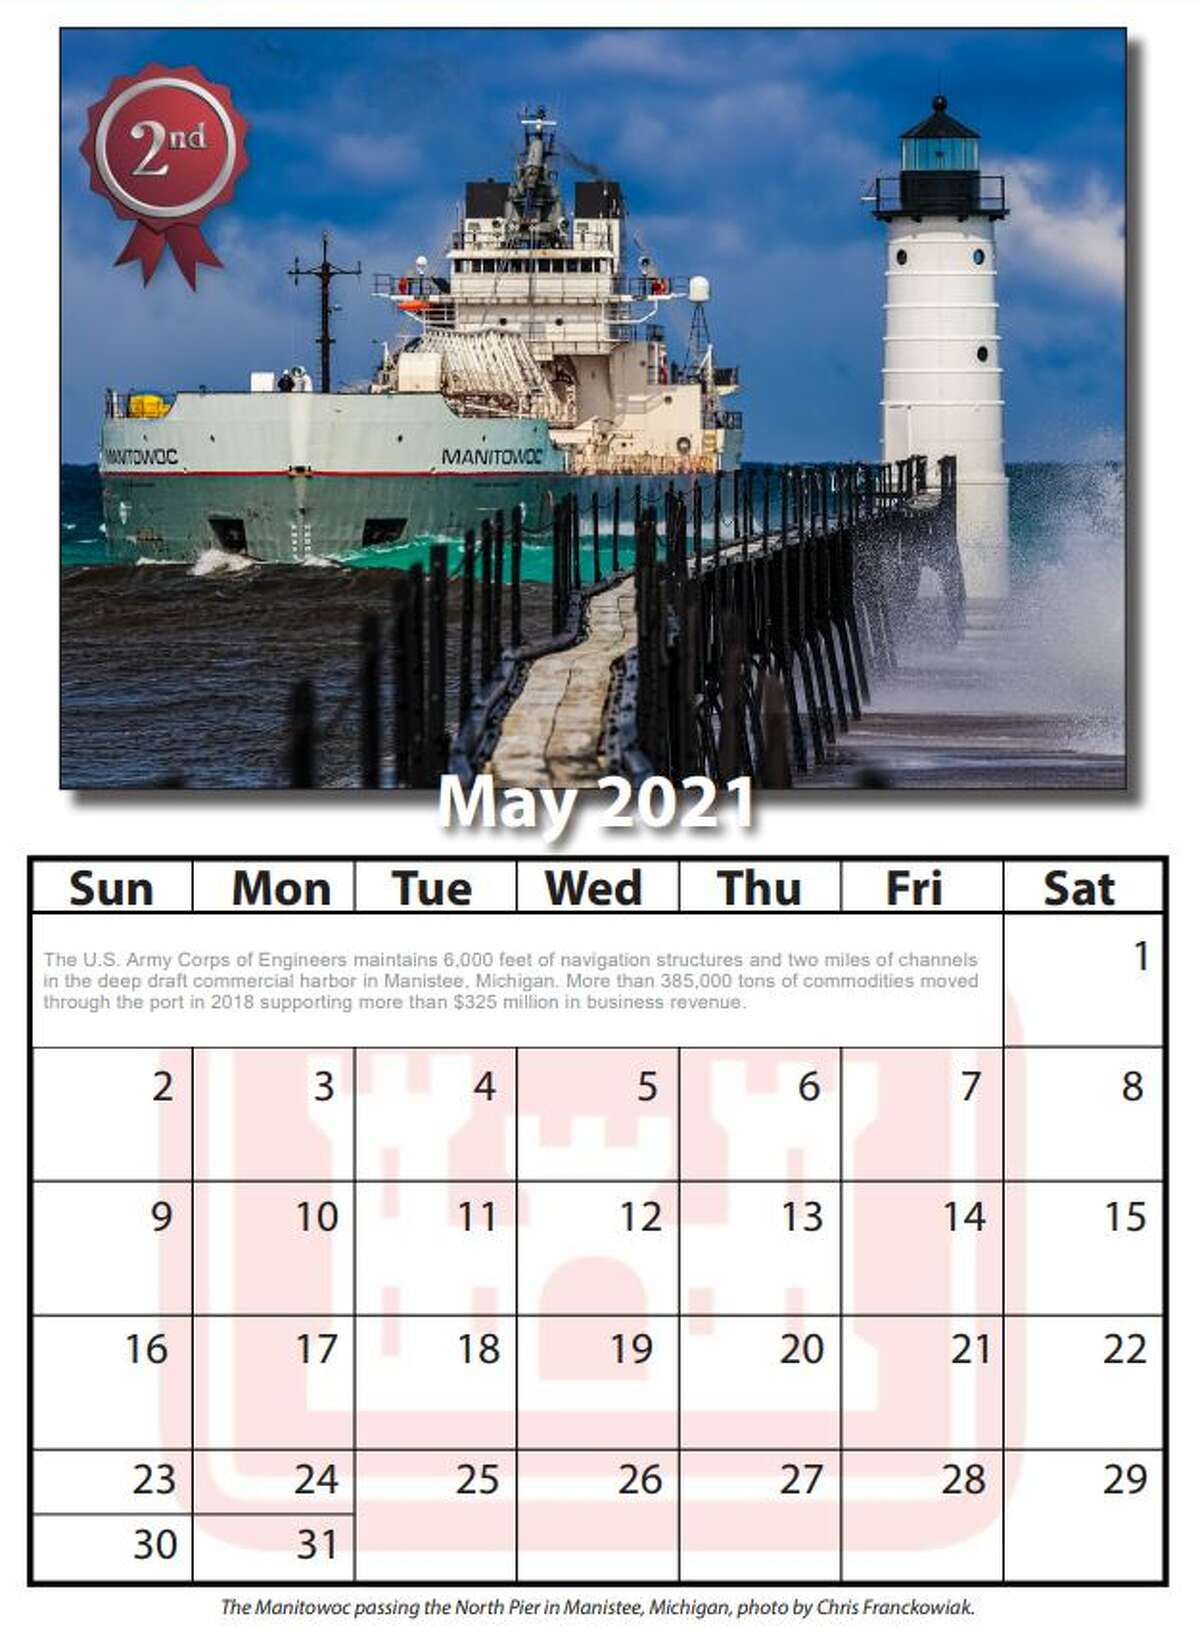 manistee-headlines-calendar-for-second-year-in-a-row